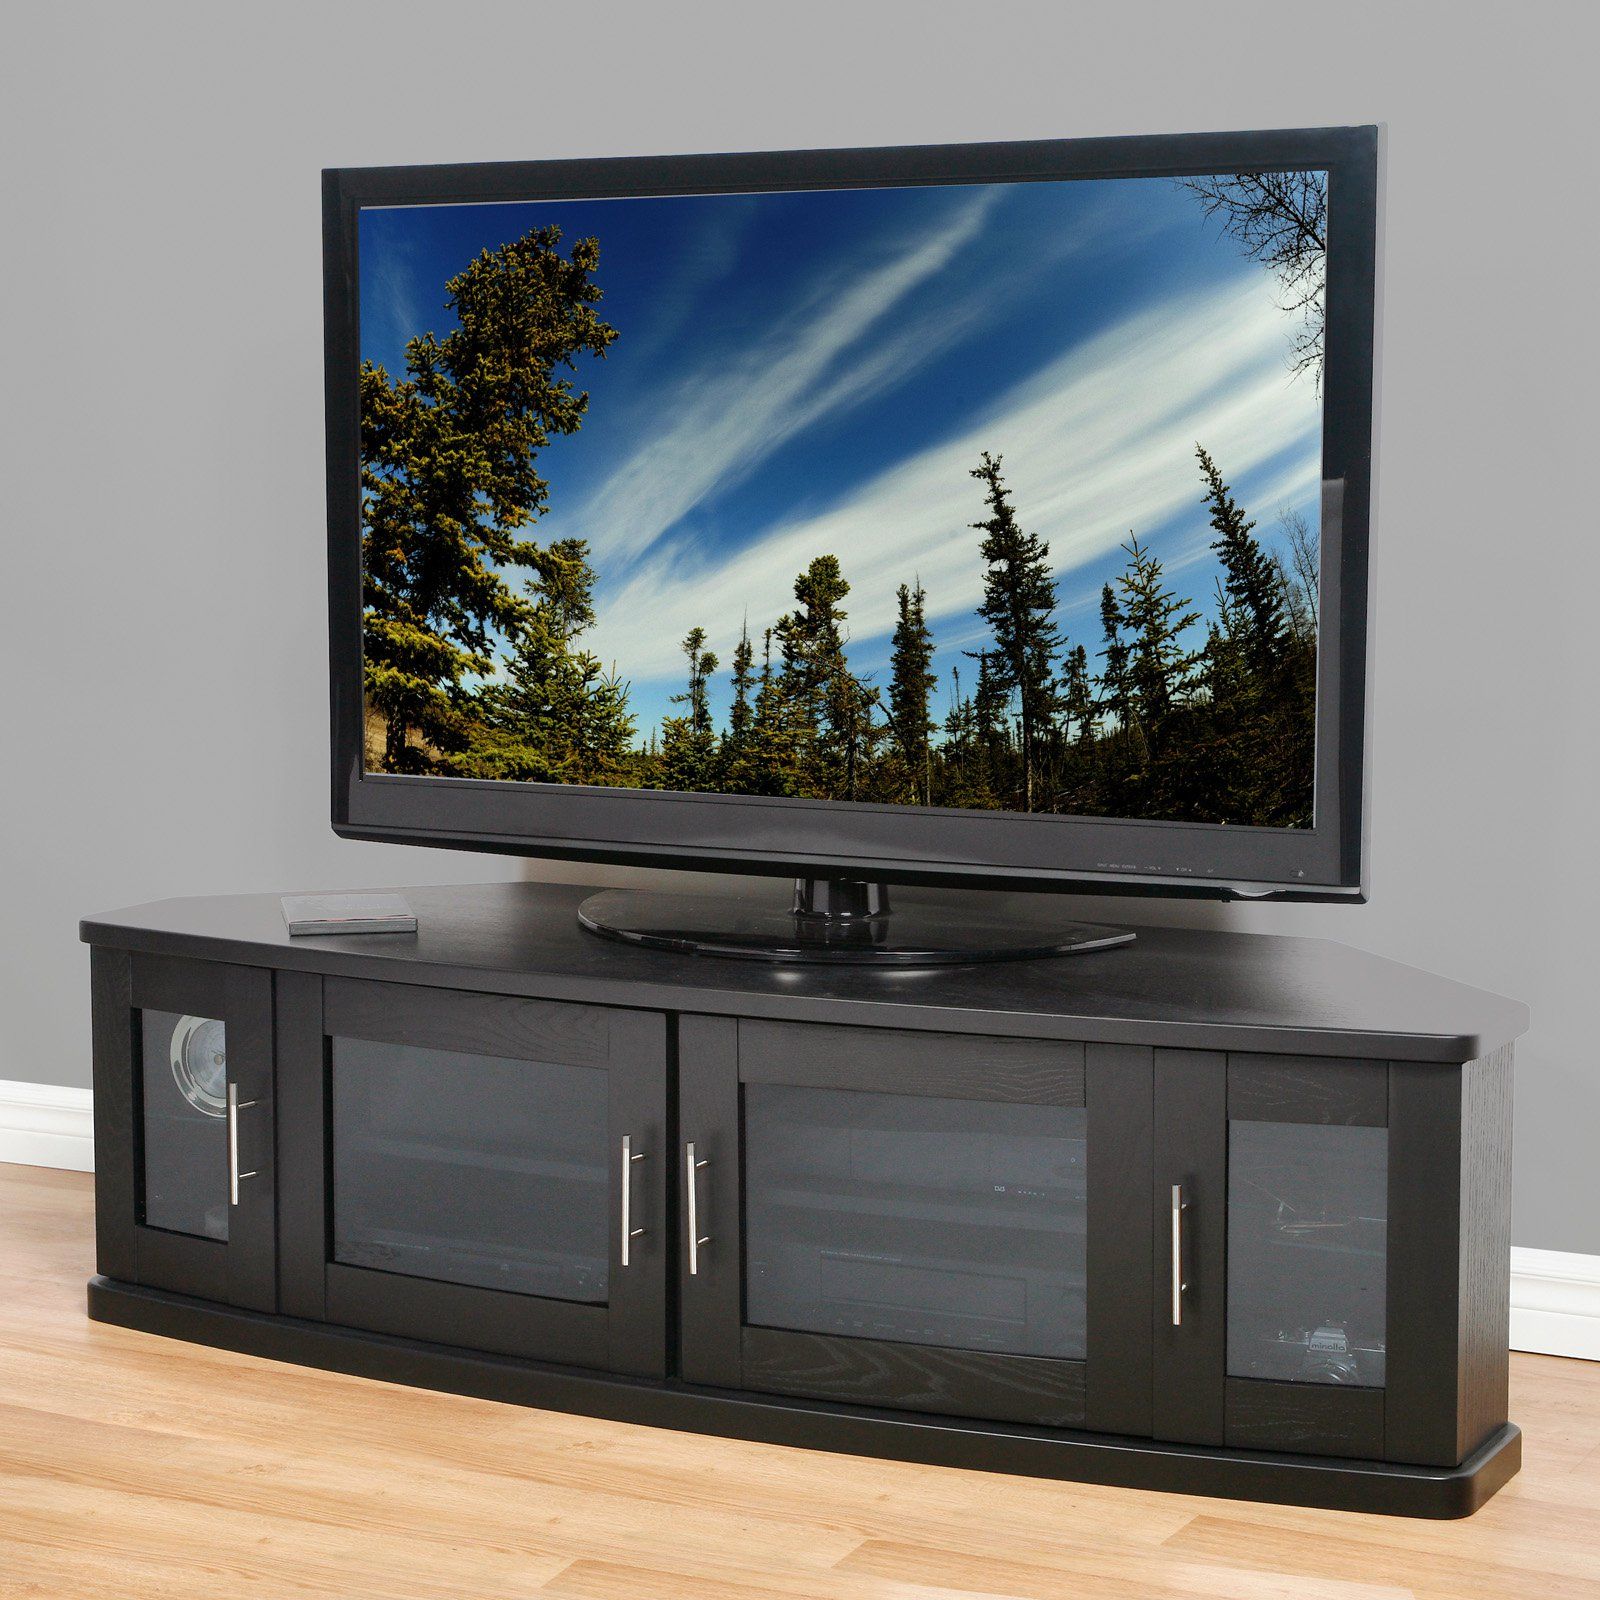 75 Inch Tv Stands – Home Ideas Intended For Bromley Oak Corner Tv Stands (View 11 of 15)